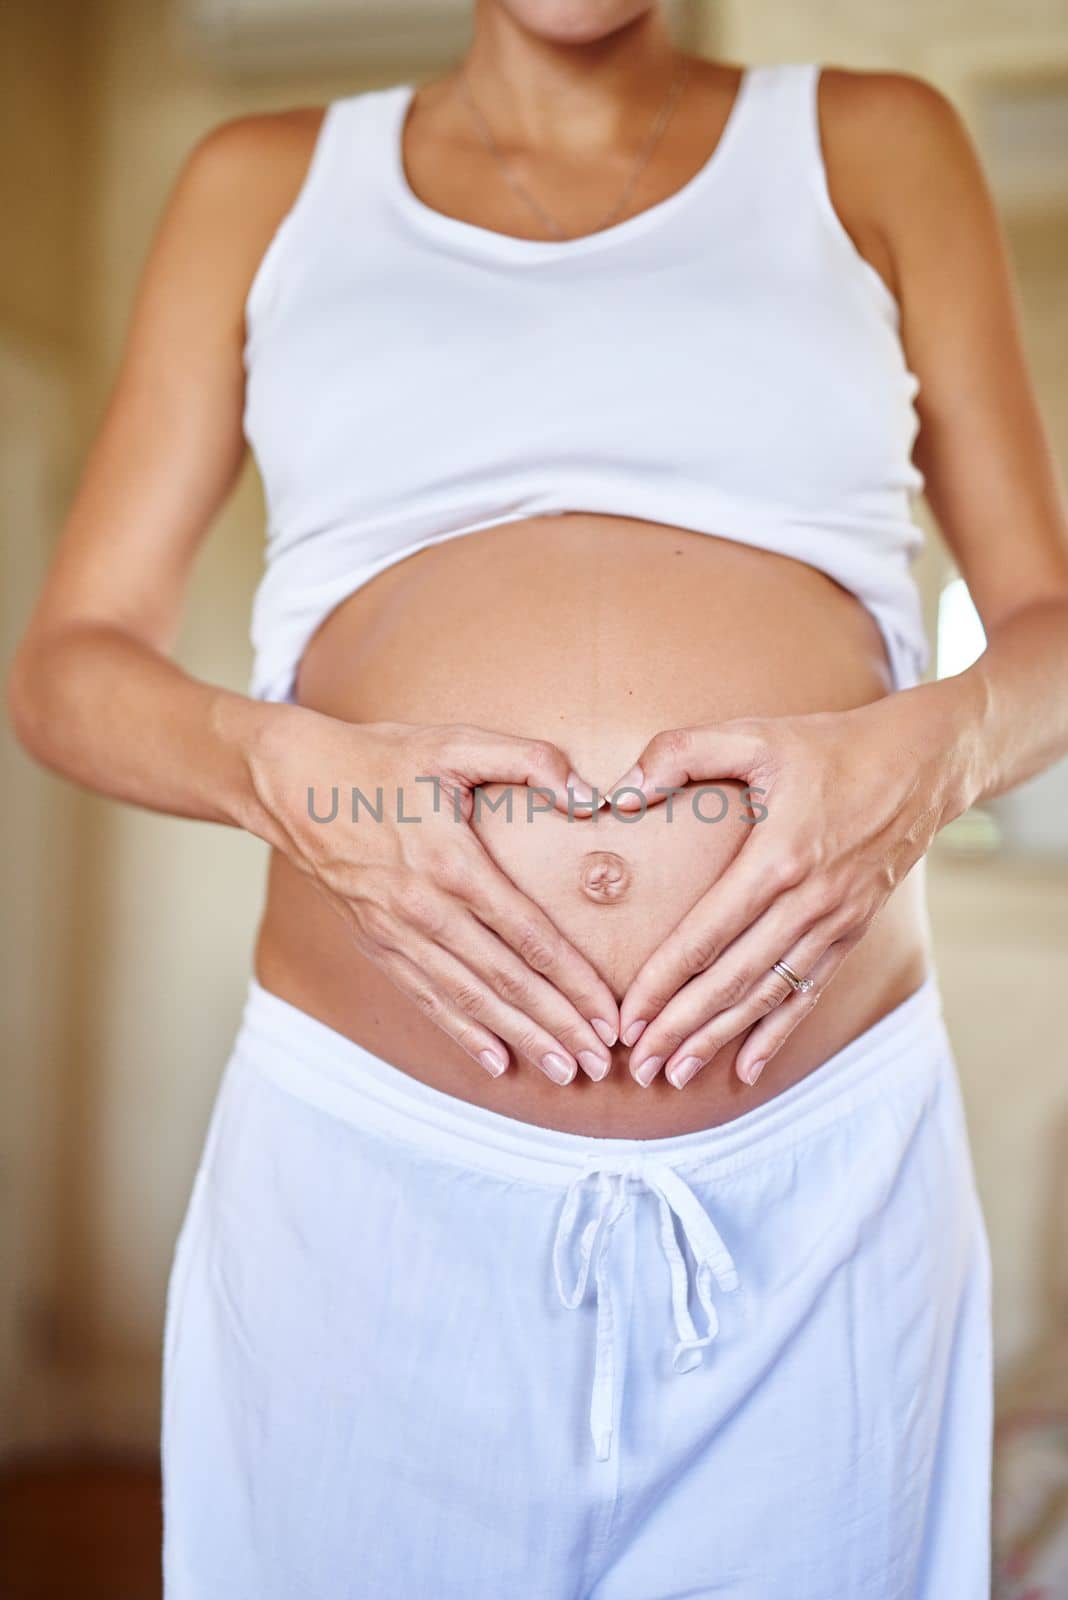 Unconditional love. a pregnant woman holding her belly with her hands forming a heart shape